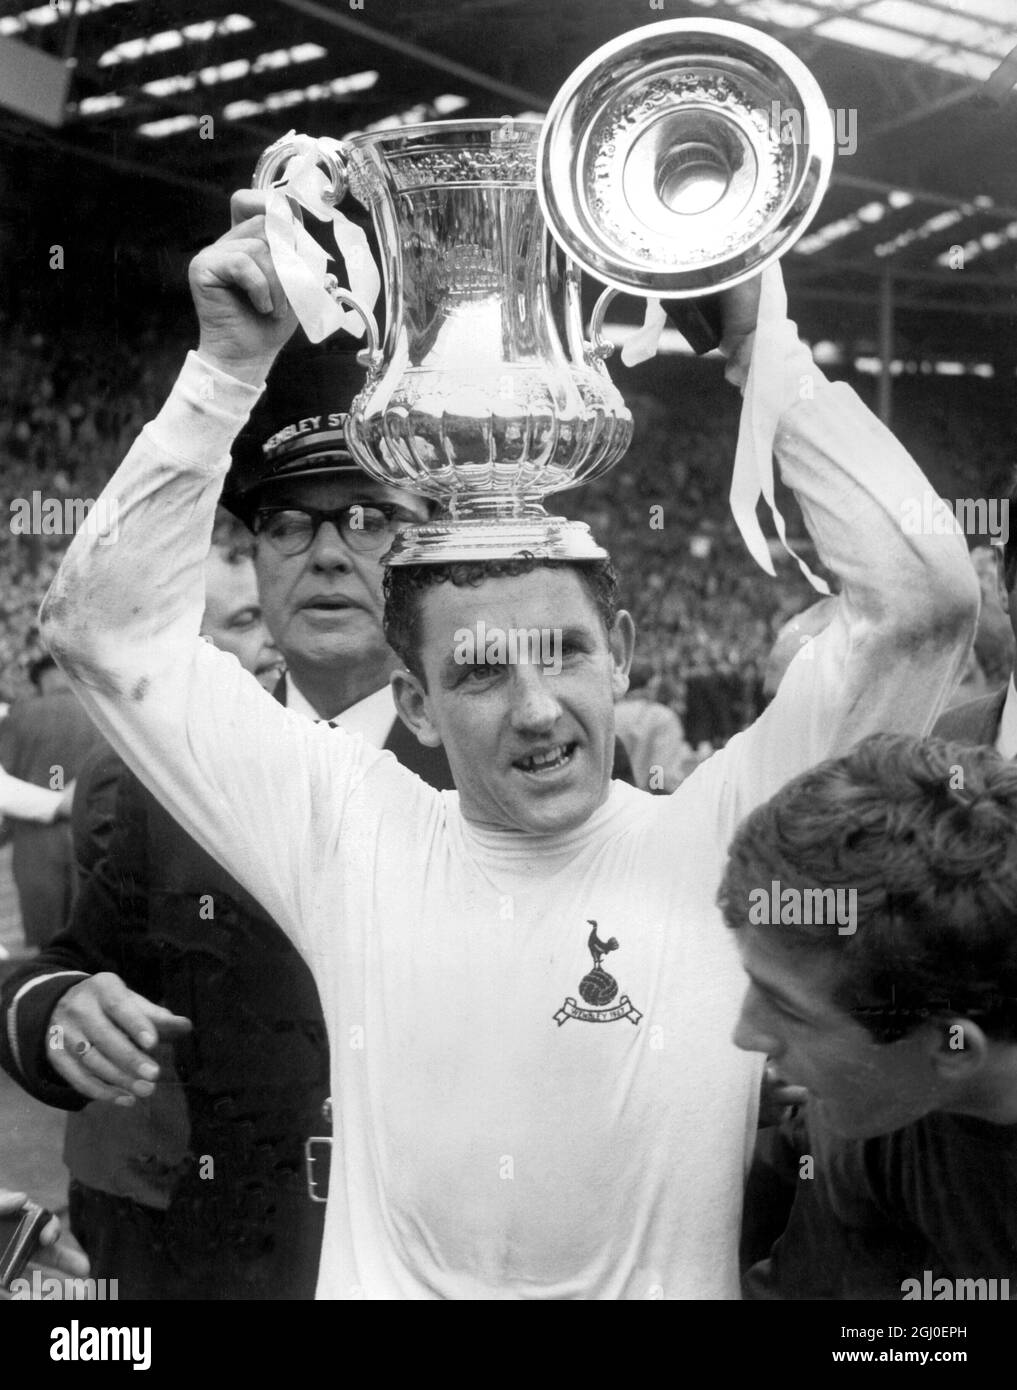 1967 FA Cup Final Chelsea v Tottenham Hotspur Dave Mackay, the Spurs captain holds the FA Cup over his head after the presentation by H.R.H. The Duke of Kent. Tottenham defeated Chelsea 2-1 to win the 1967 FA Cup Final. 20th May 1967. Stock Photo